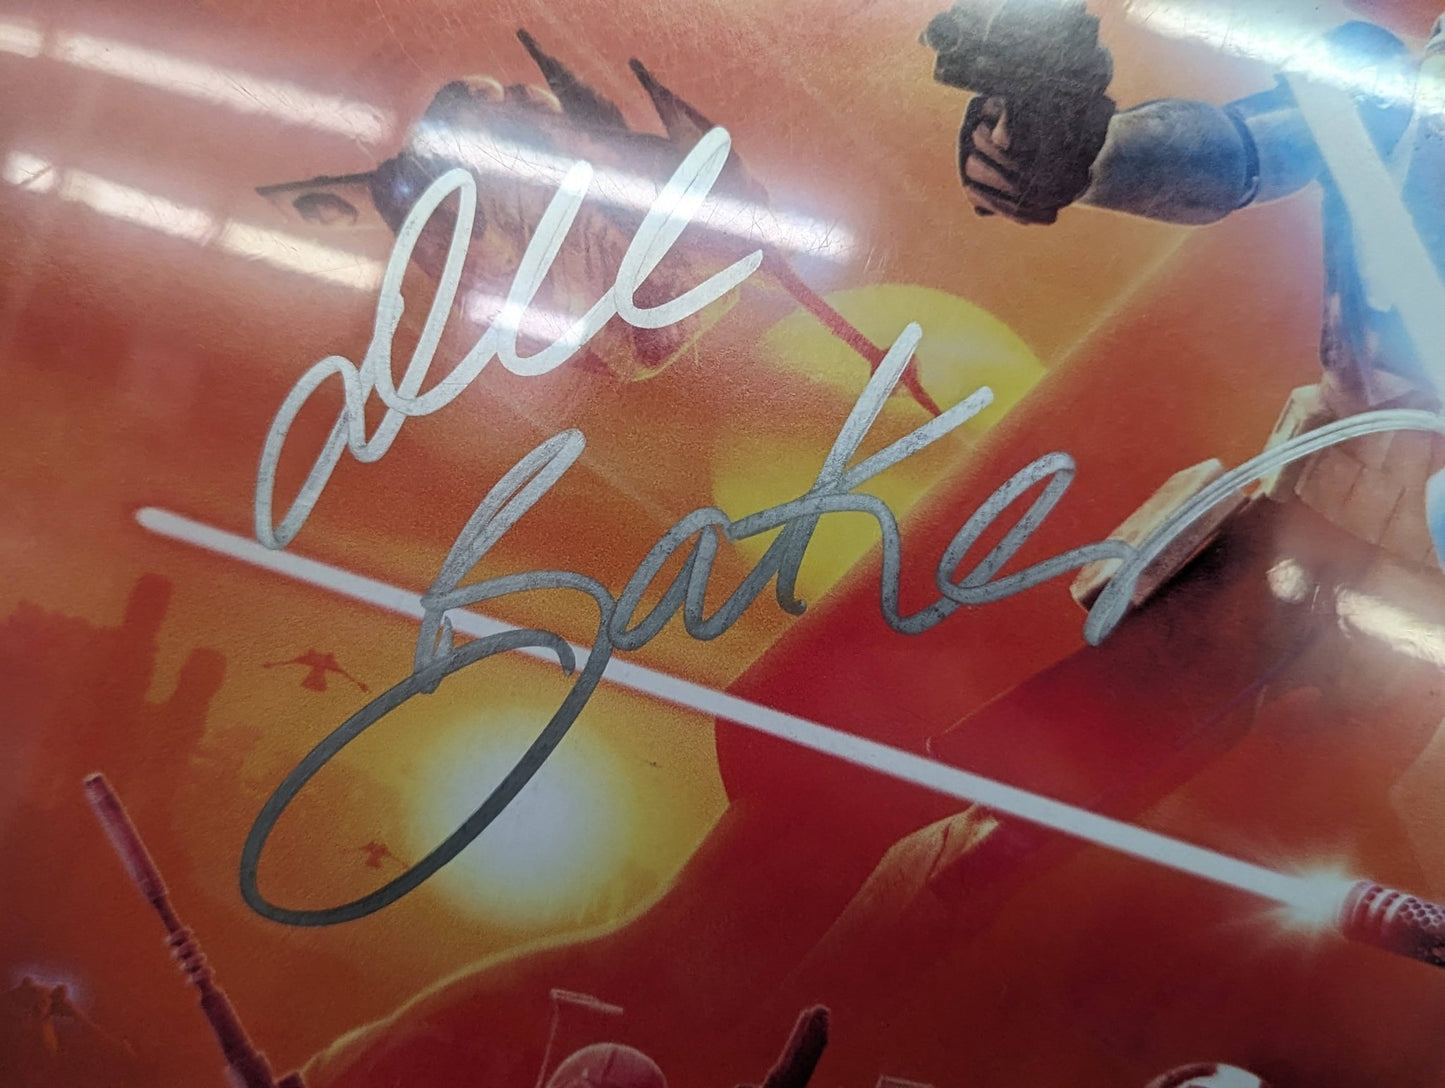 Star Wars: The Clone Wars Cast Signed Poster - Covert Comics and Collectibles